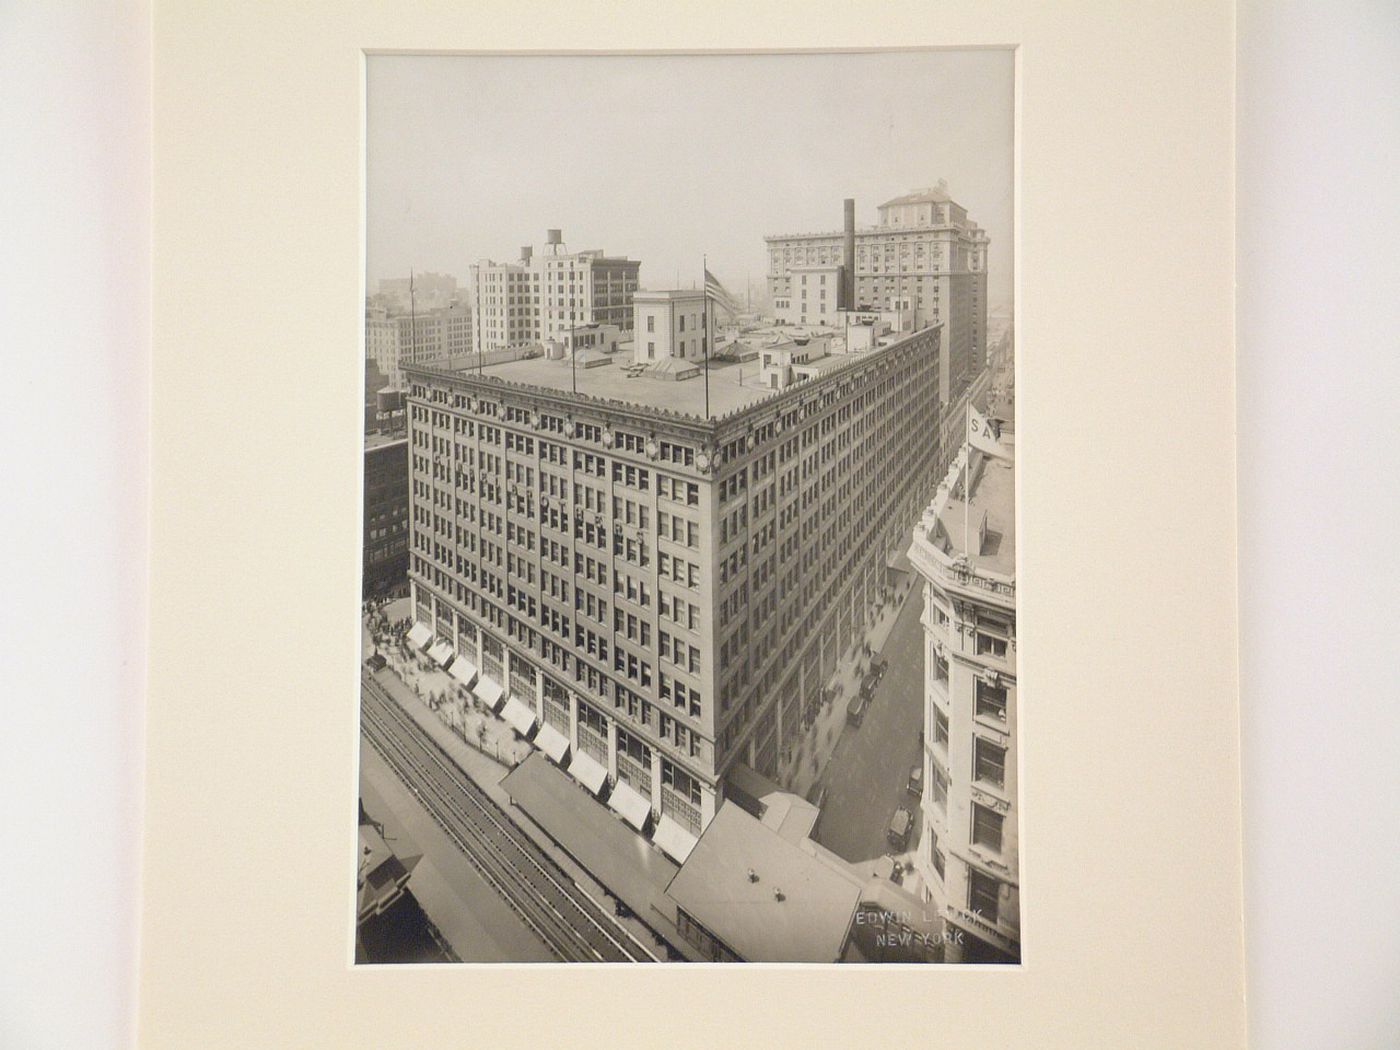 Overview of street corner occupied by Gimbels Department Store, New York City, New York